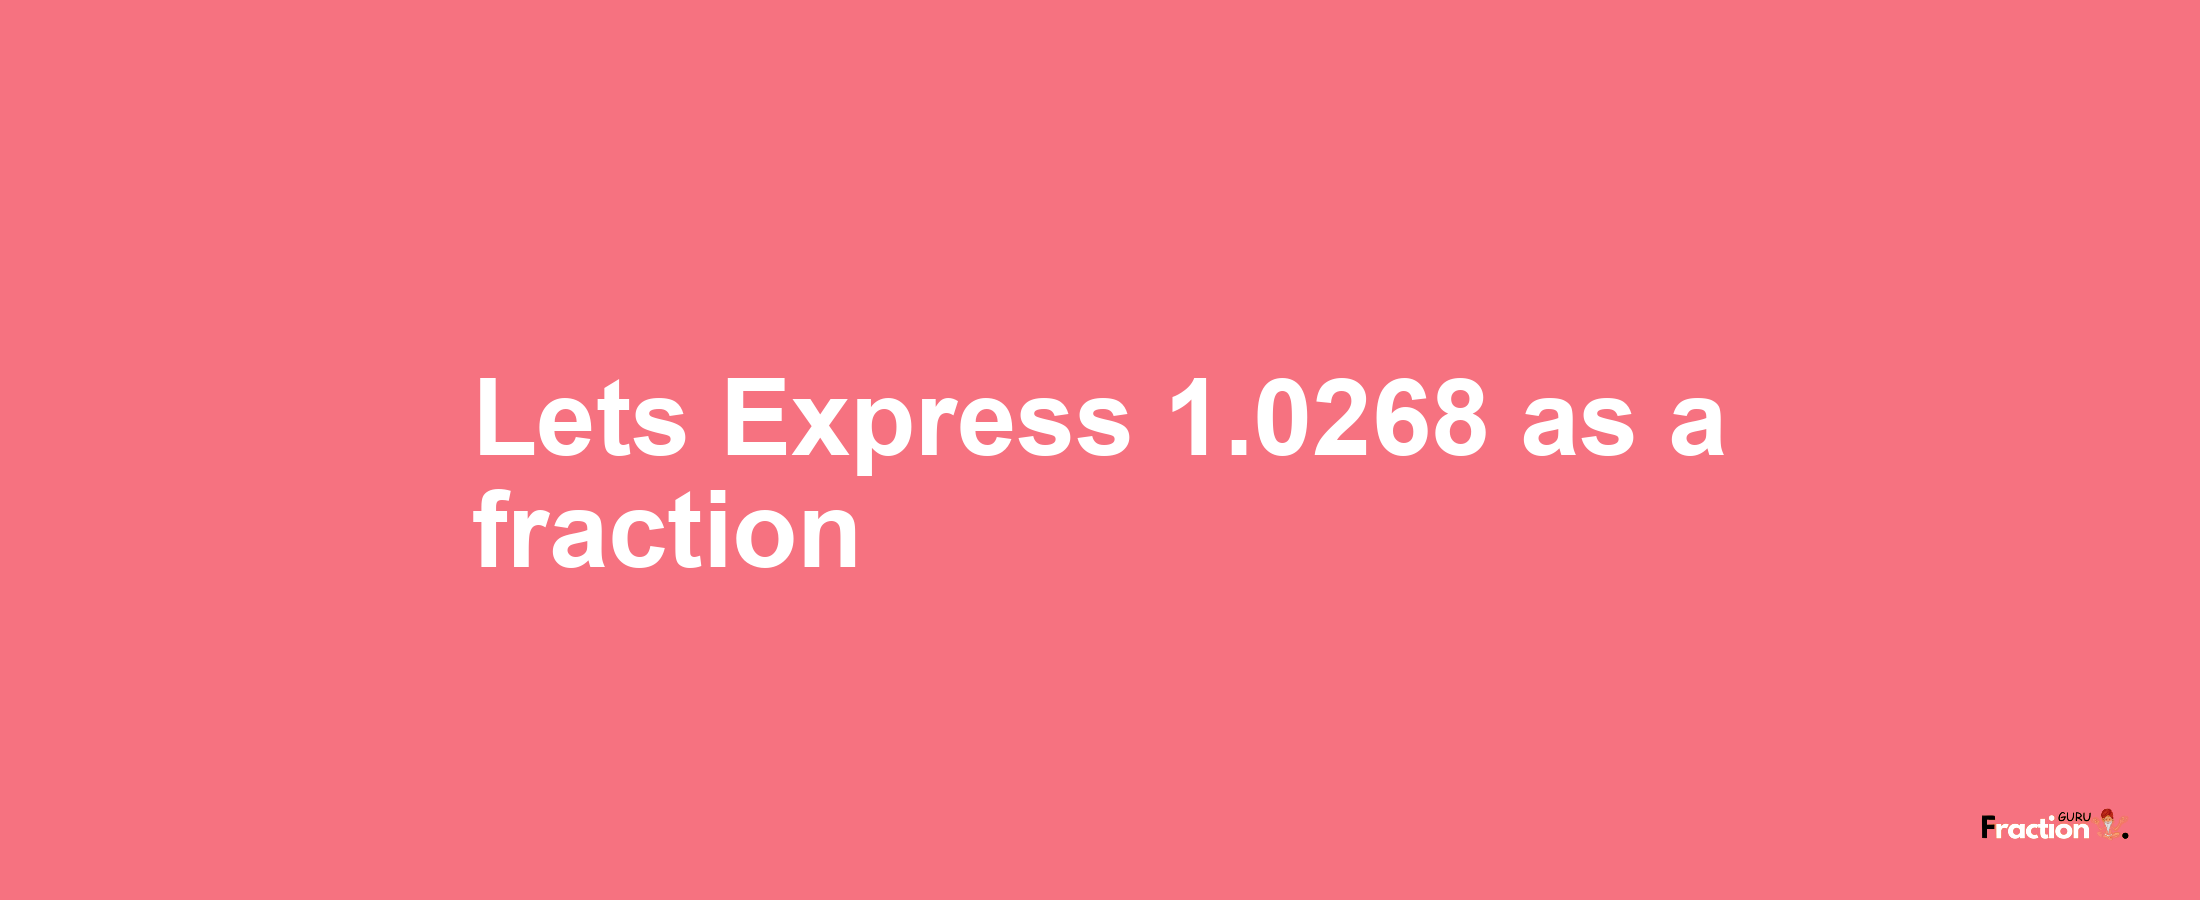 Lets Express 1.0268 as afraction